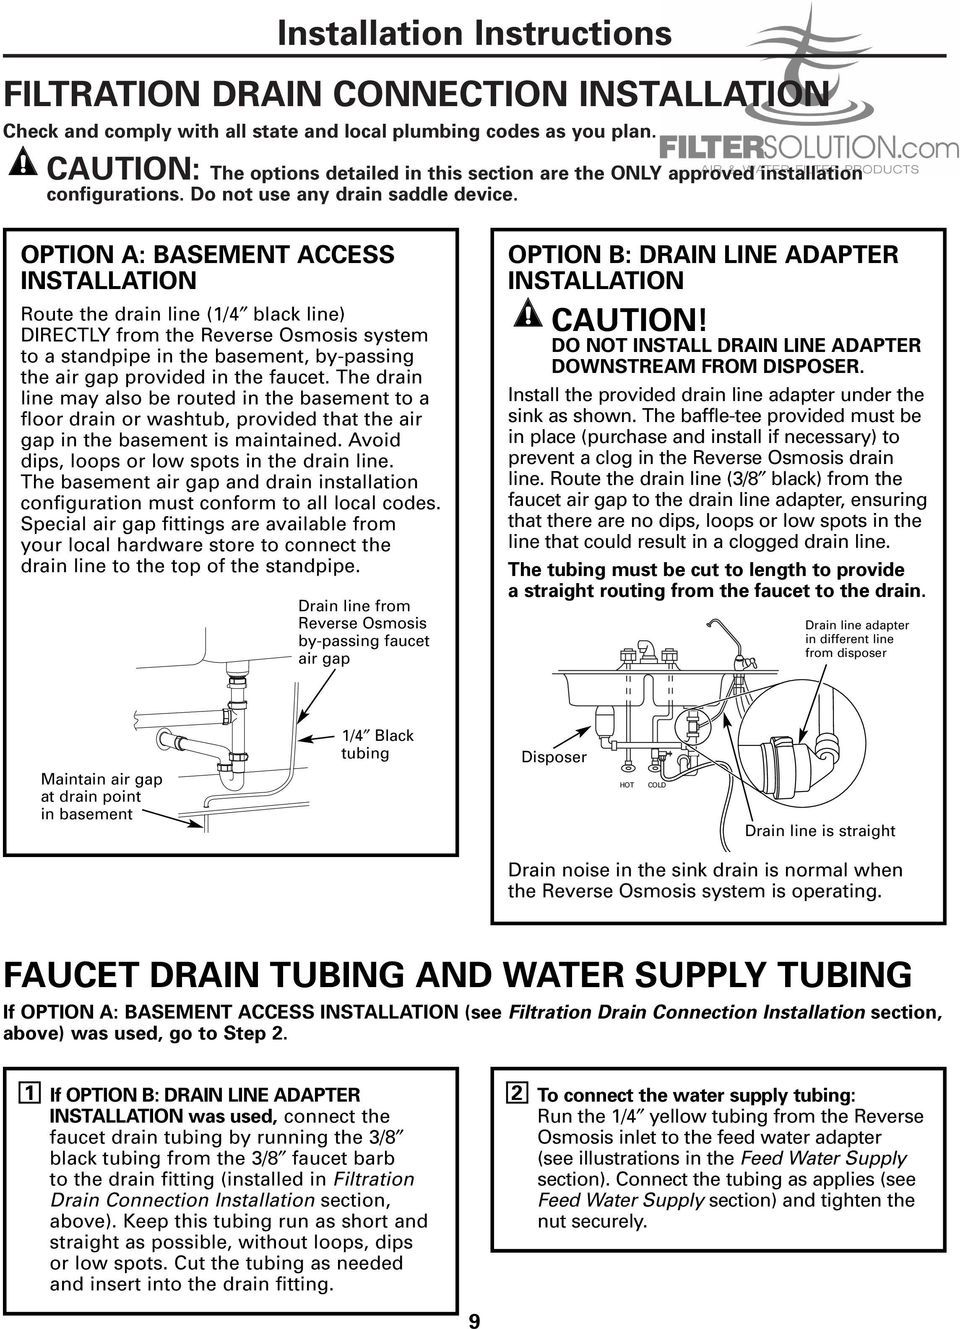 OPTION A: BASEMENT ACCESS INSTALLATION Route the drain line (1/4 black line) DIRECTLY from the Reverse Osmosis system to a standpipe in the basement, by-passing the air gap provided in the faucet.